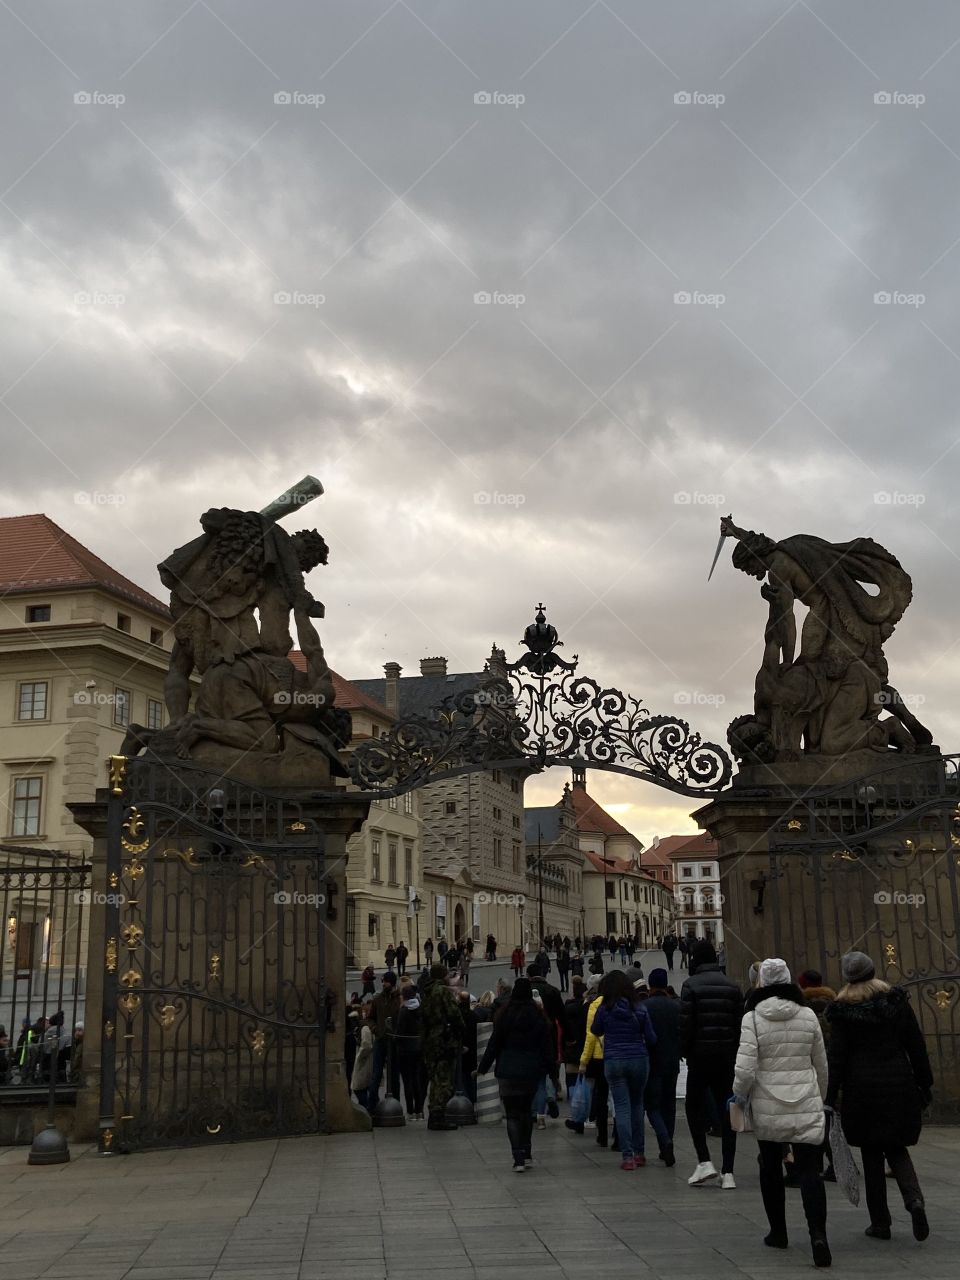 At the entrance to the gate of parliament in the city of Prague, the gate is well guarded by the guards and the statue on the gate is Hercules, the only man in antiquity with supernatural powers.